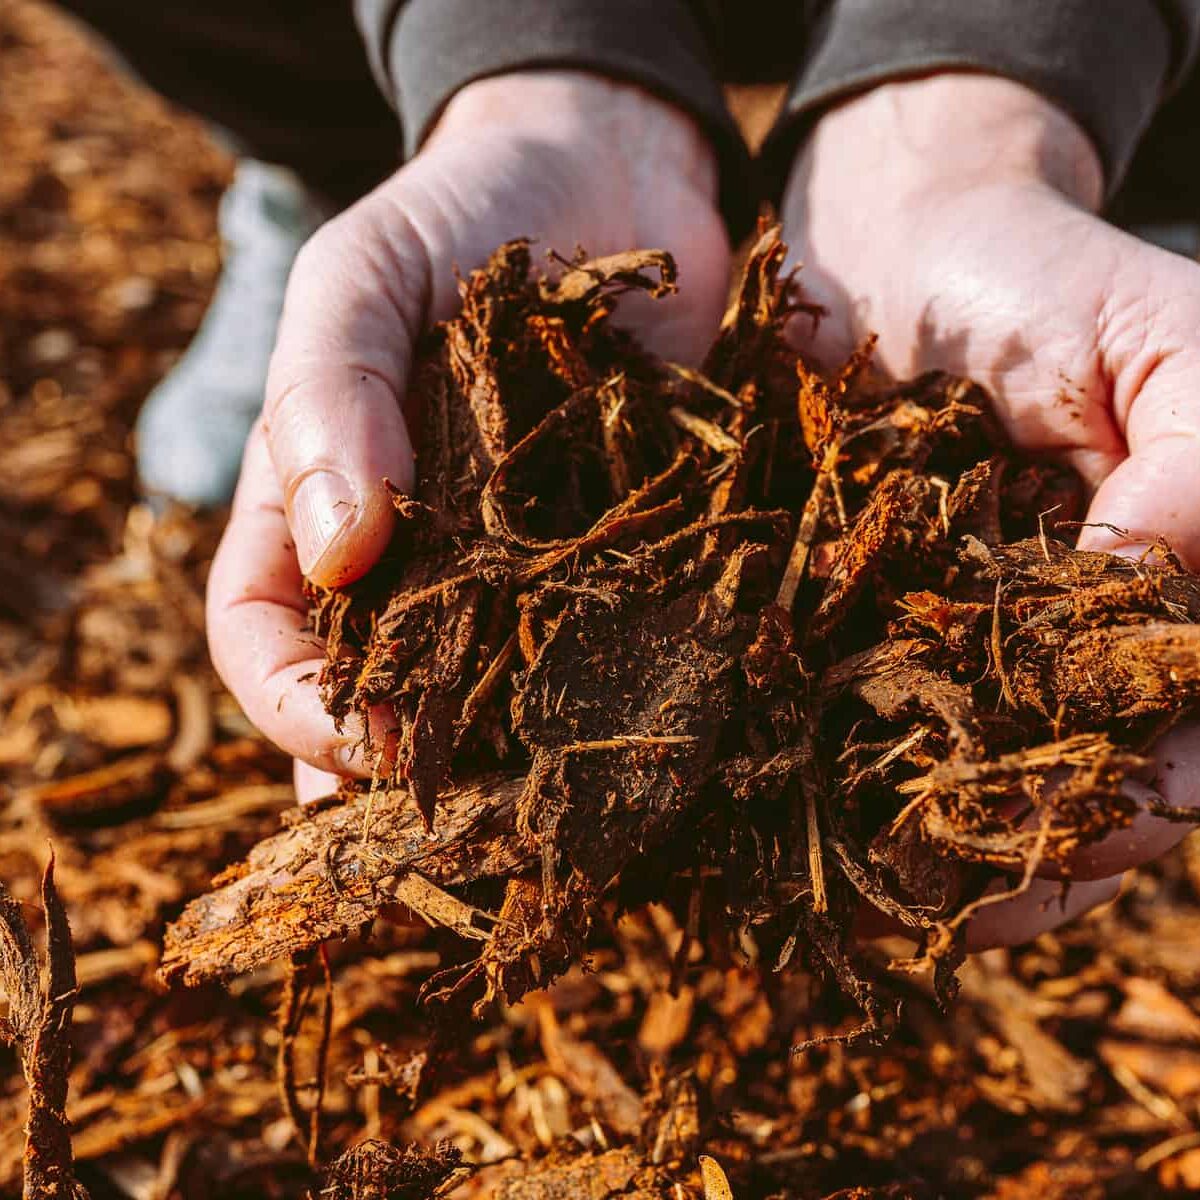 man holding pile of wood chip mulch recycled, shredded tree bark and leftovers